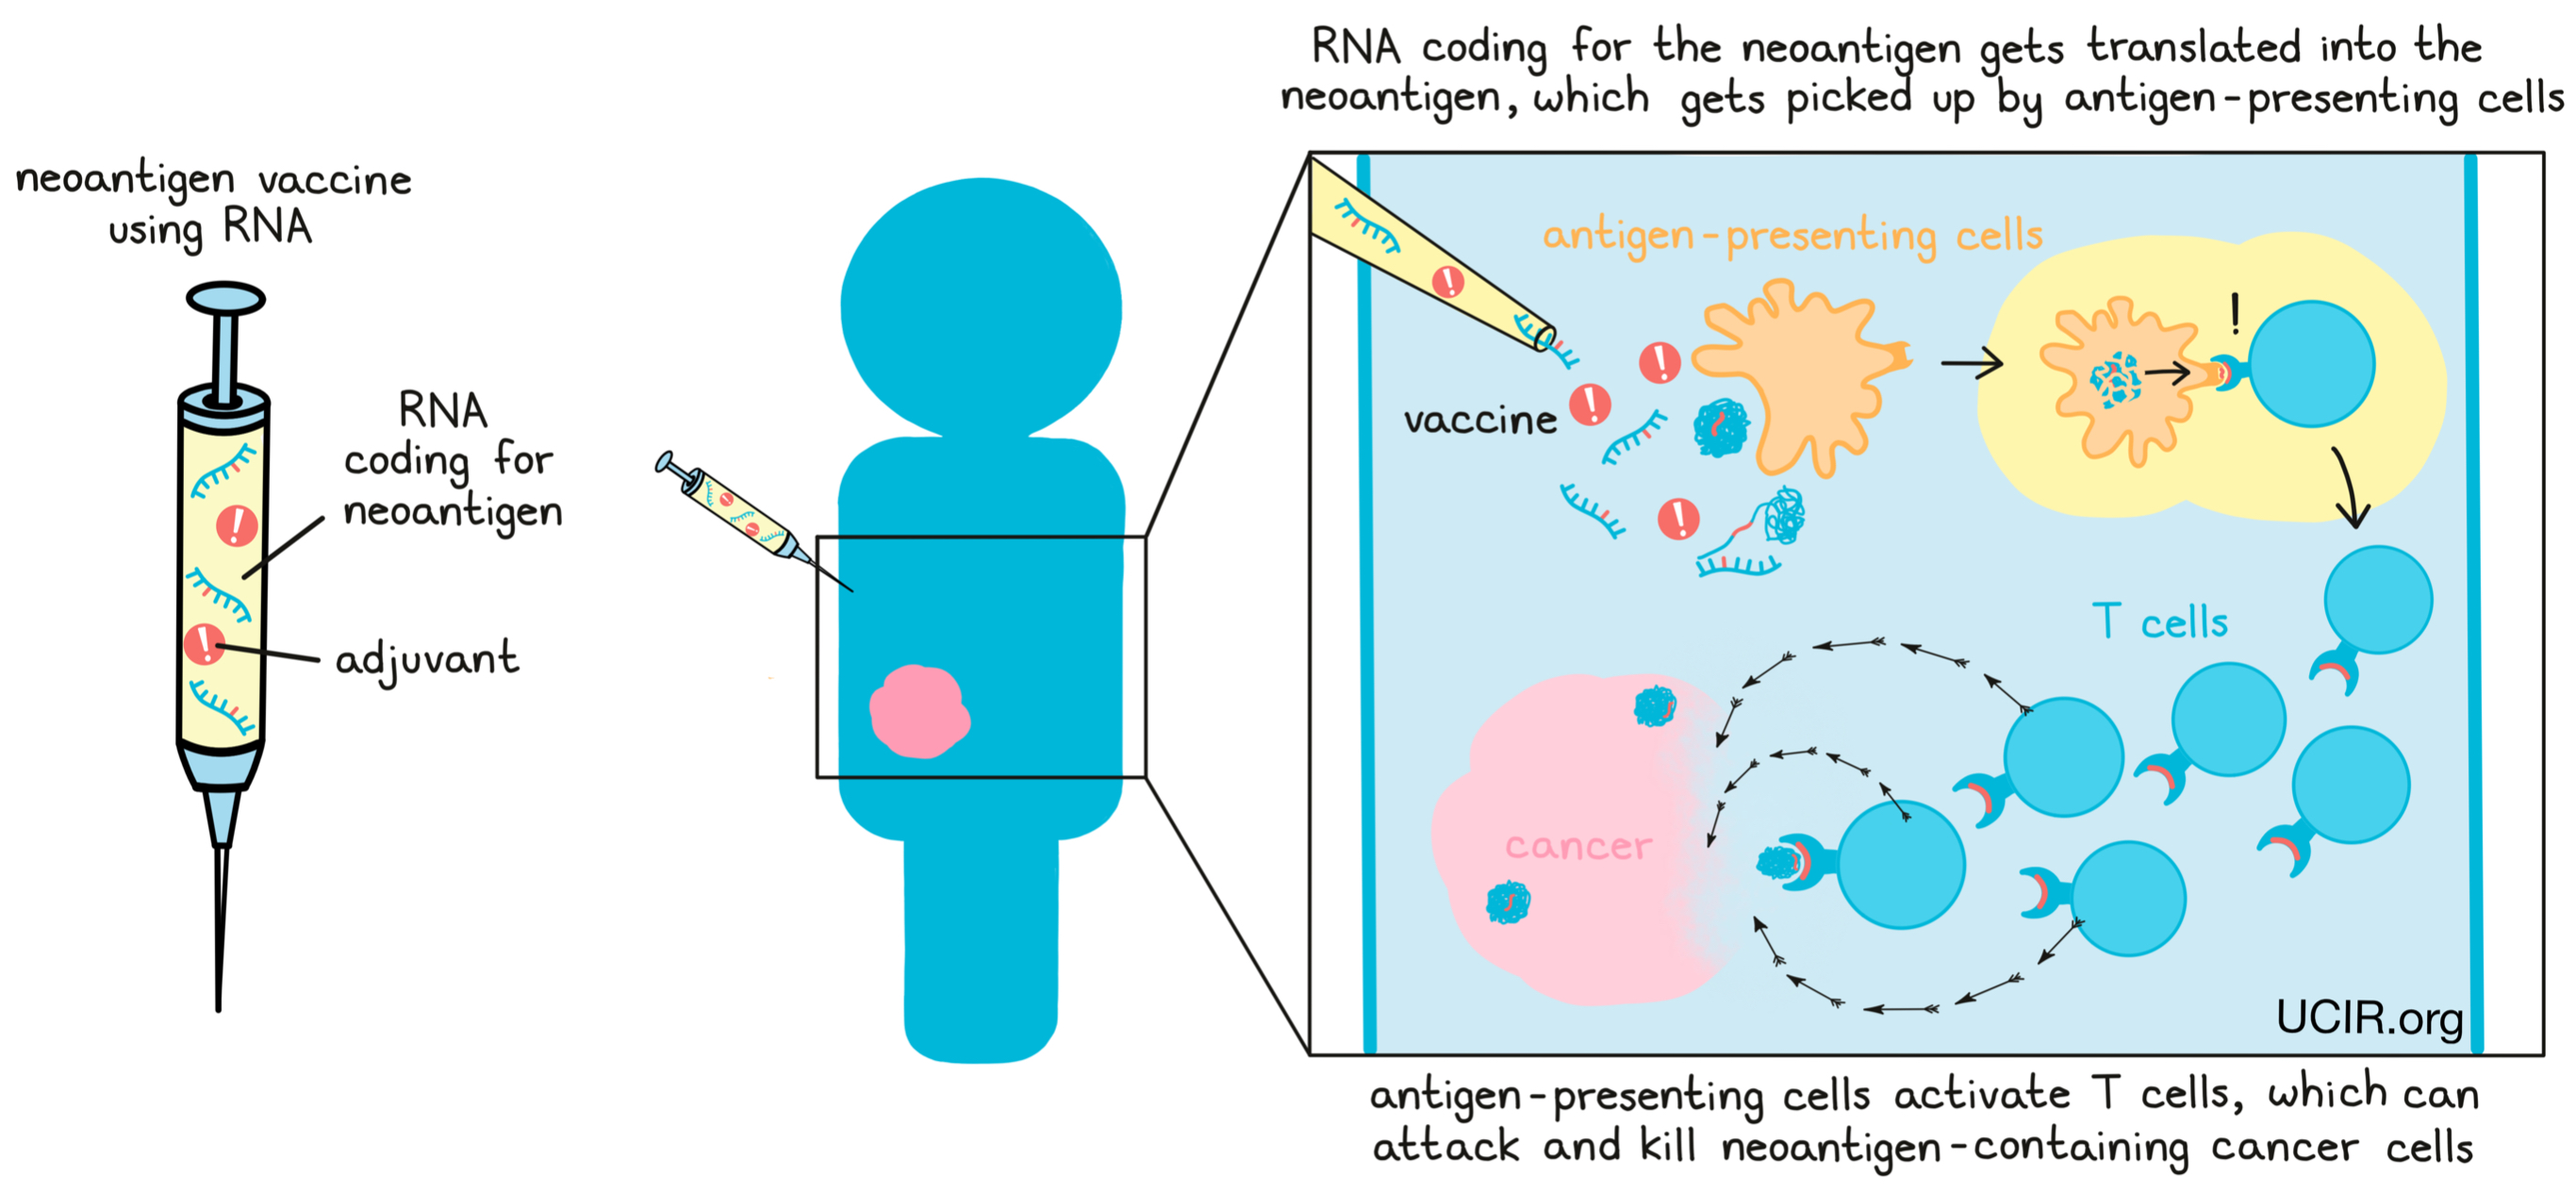 Illustration showing what's in a neoantigen vaccine using RNA